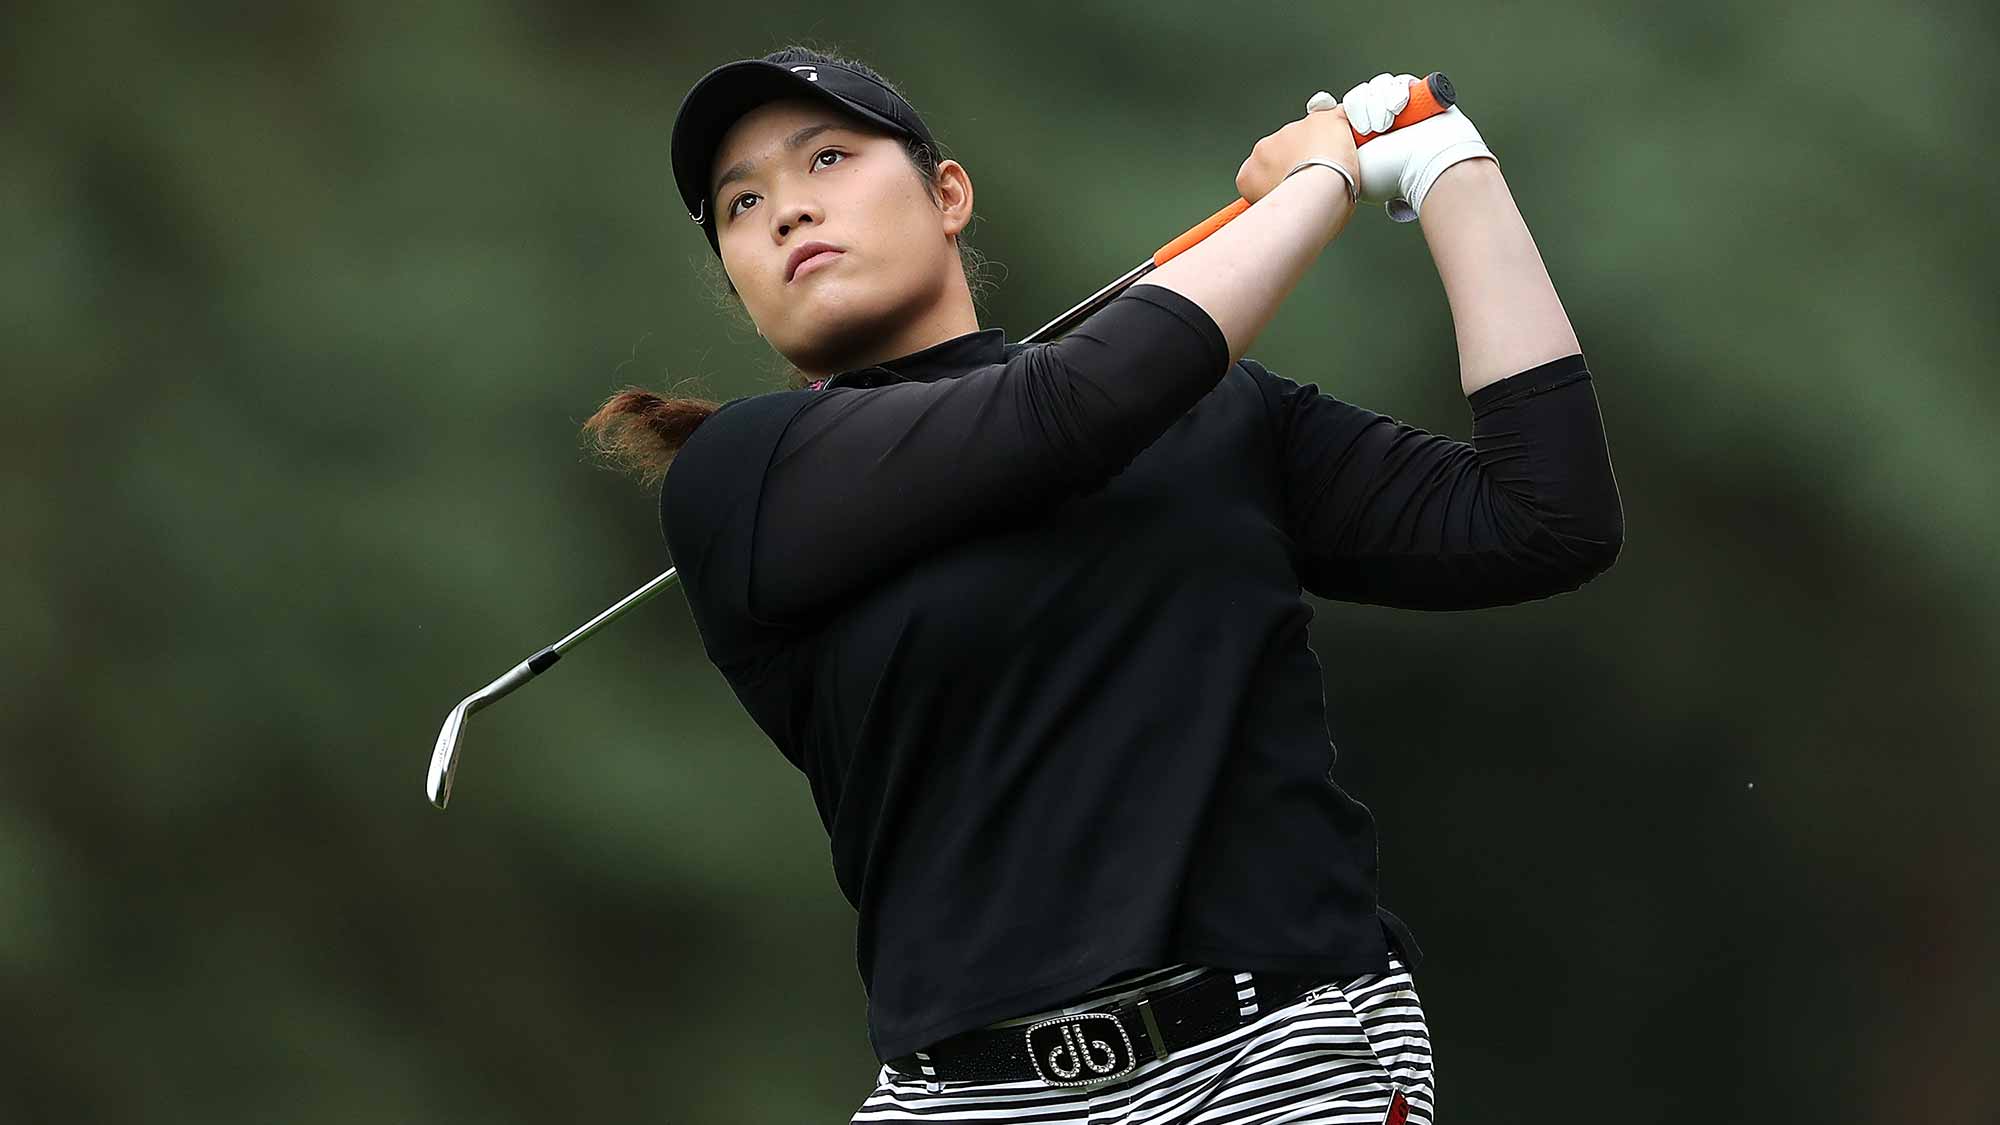 Ariya Jutanugarn of Thailand hits her second shot on the 1st hole during the final round of the Ricoh Women's British Open at Woburn Golf Club